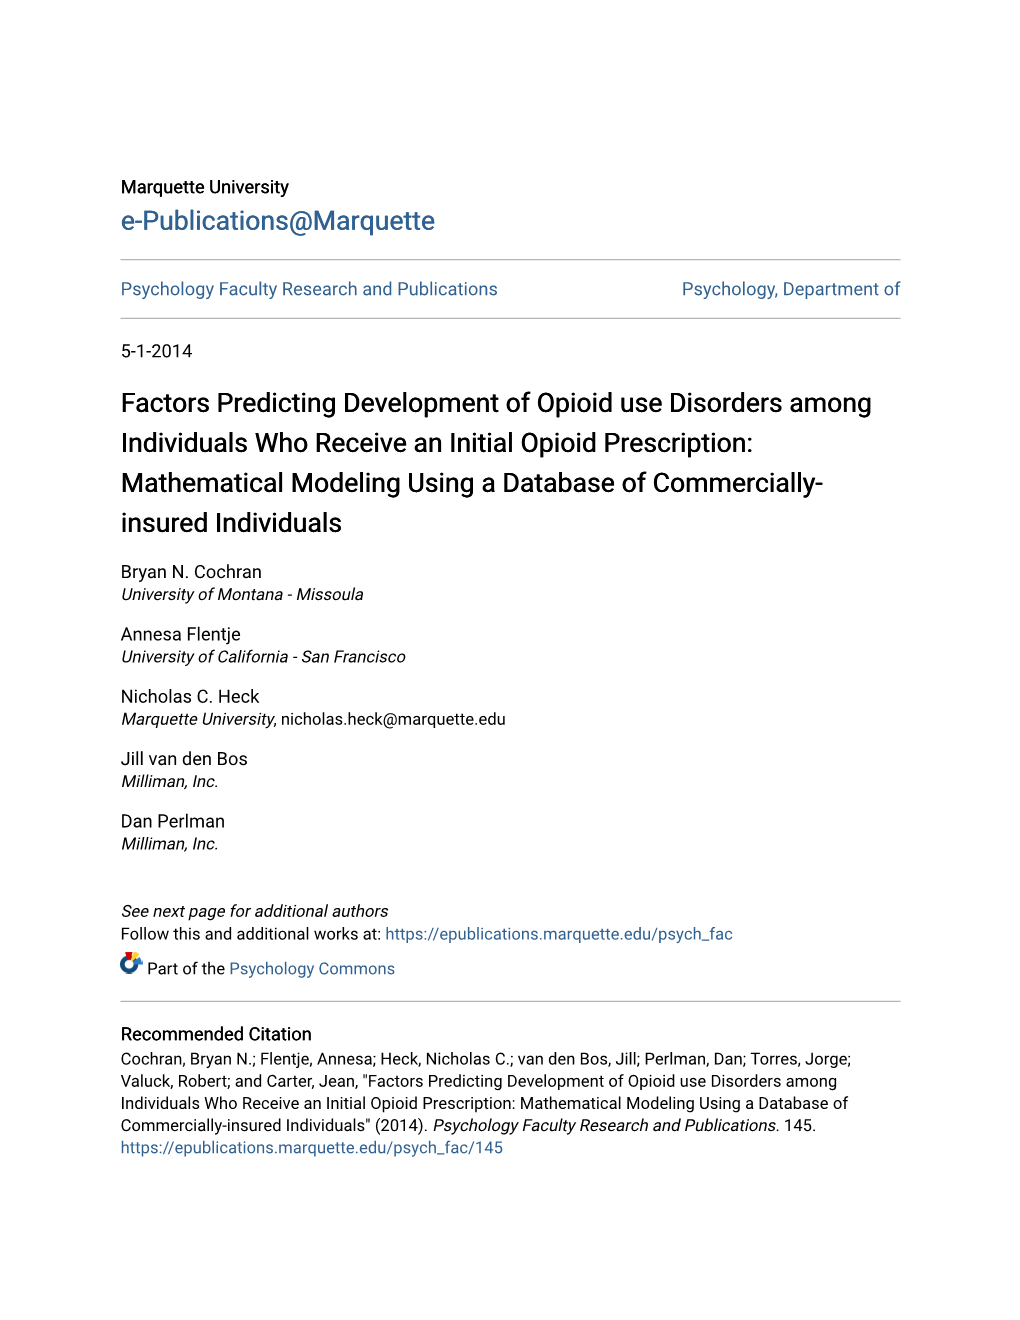 Factors Predicting Development of Opioid Use Disorders Among Individuals Who Receive an Initial Opioid Prescription: Mathematica